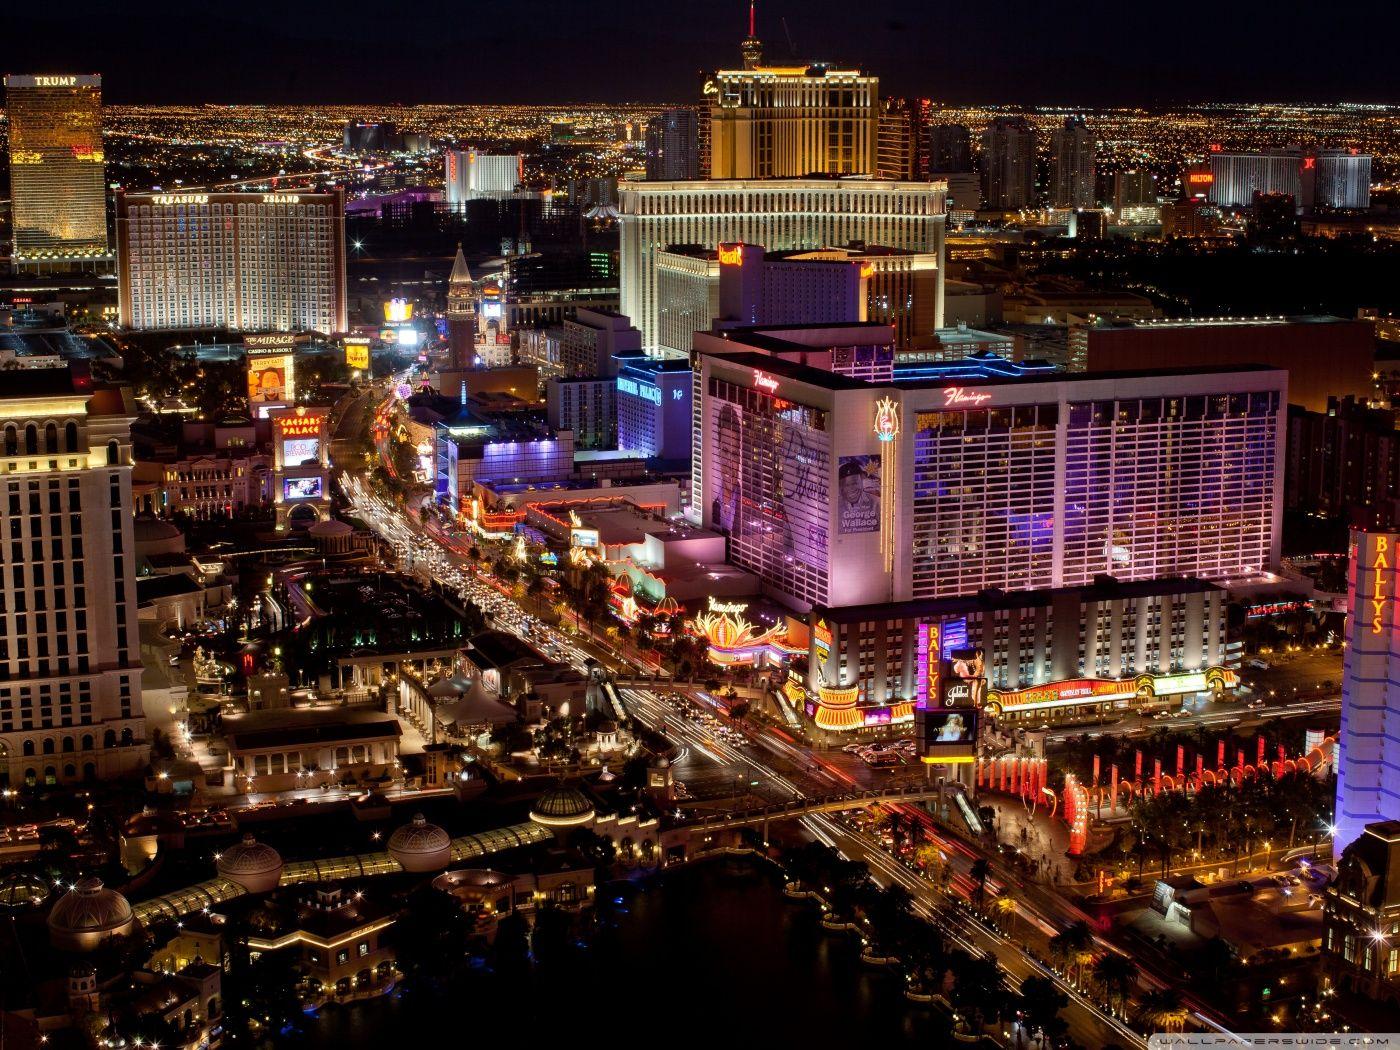 The strip at night from a high vantage point - Las Vegas